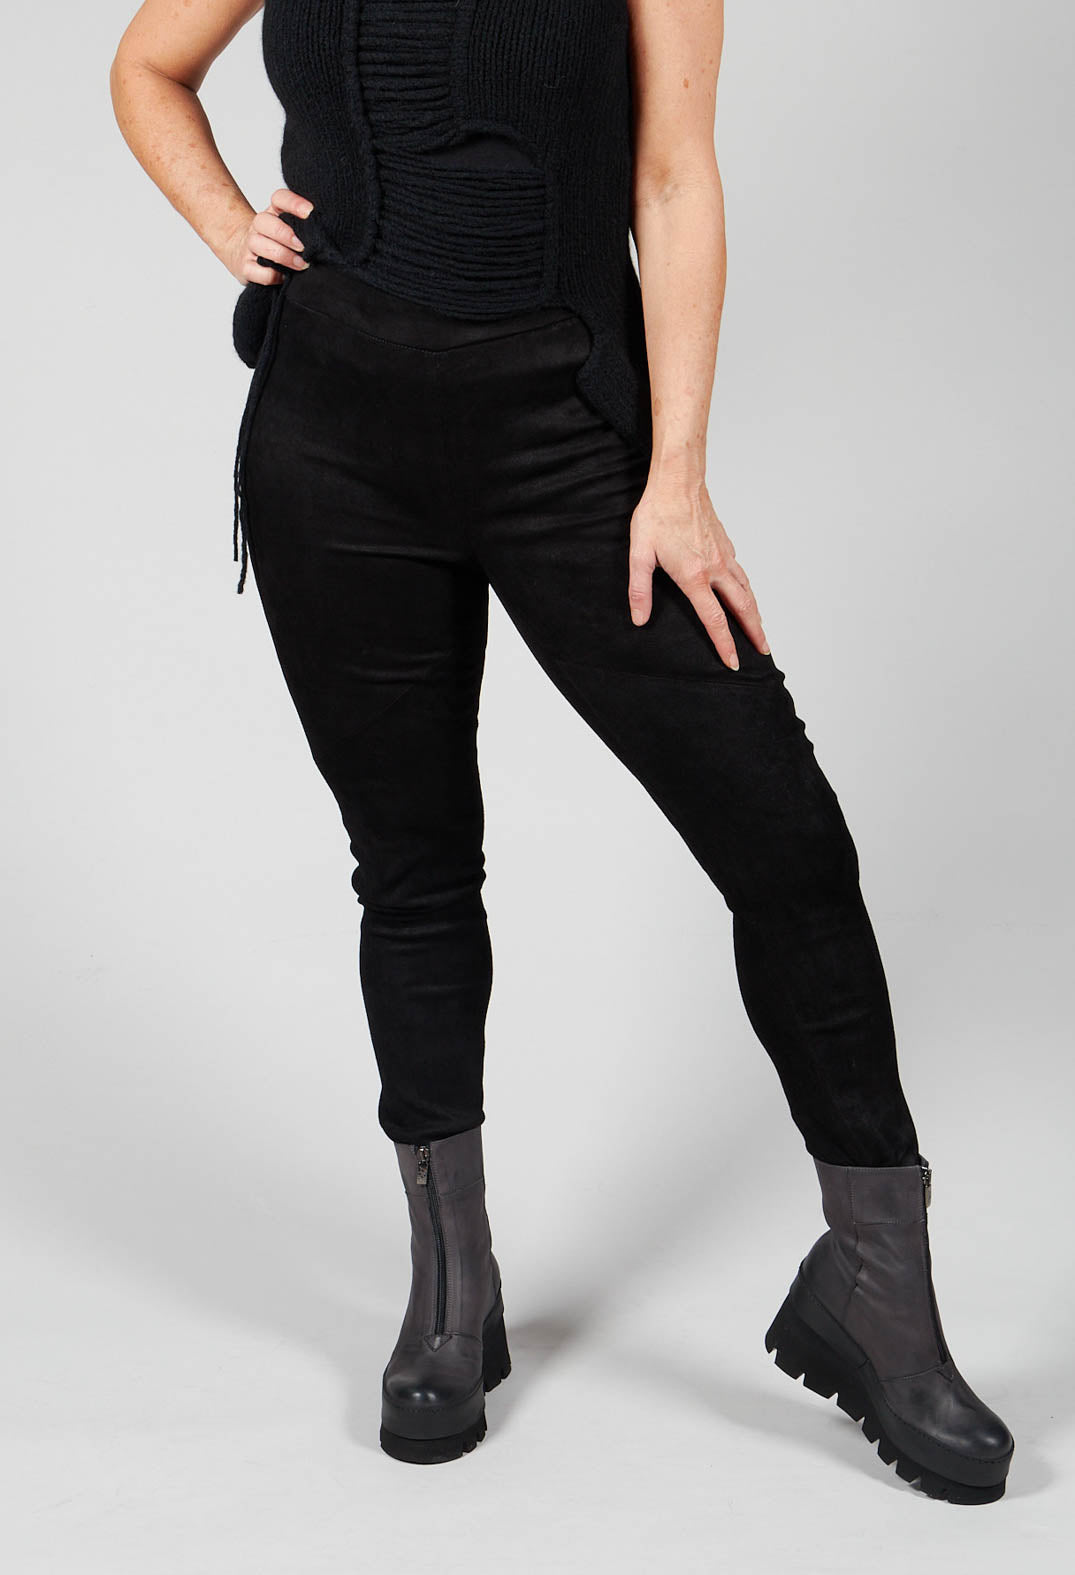 Suede Stretch Fit Skinny Trousers in Black